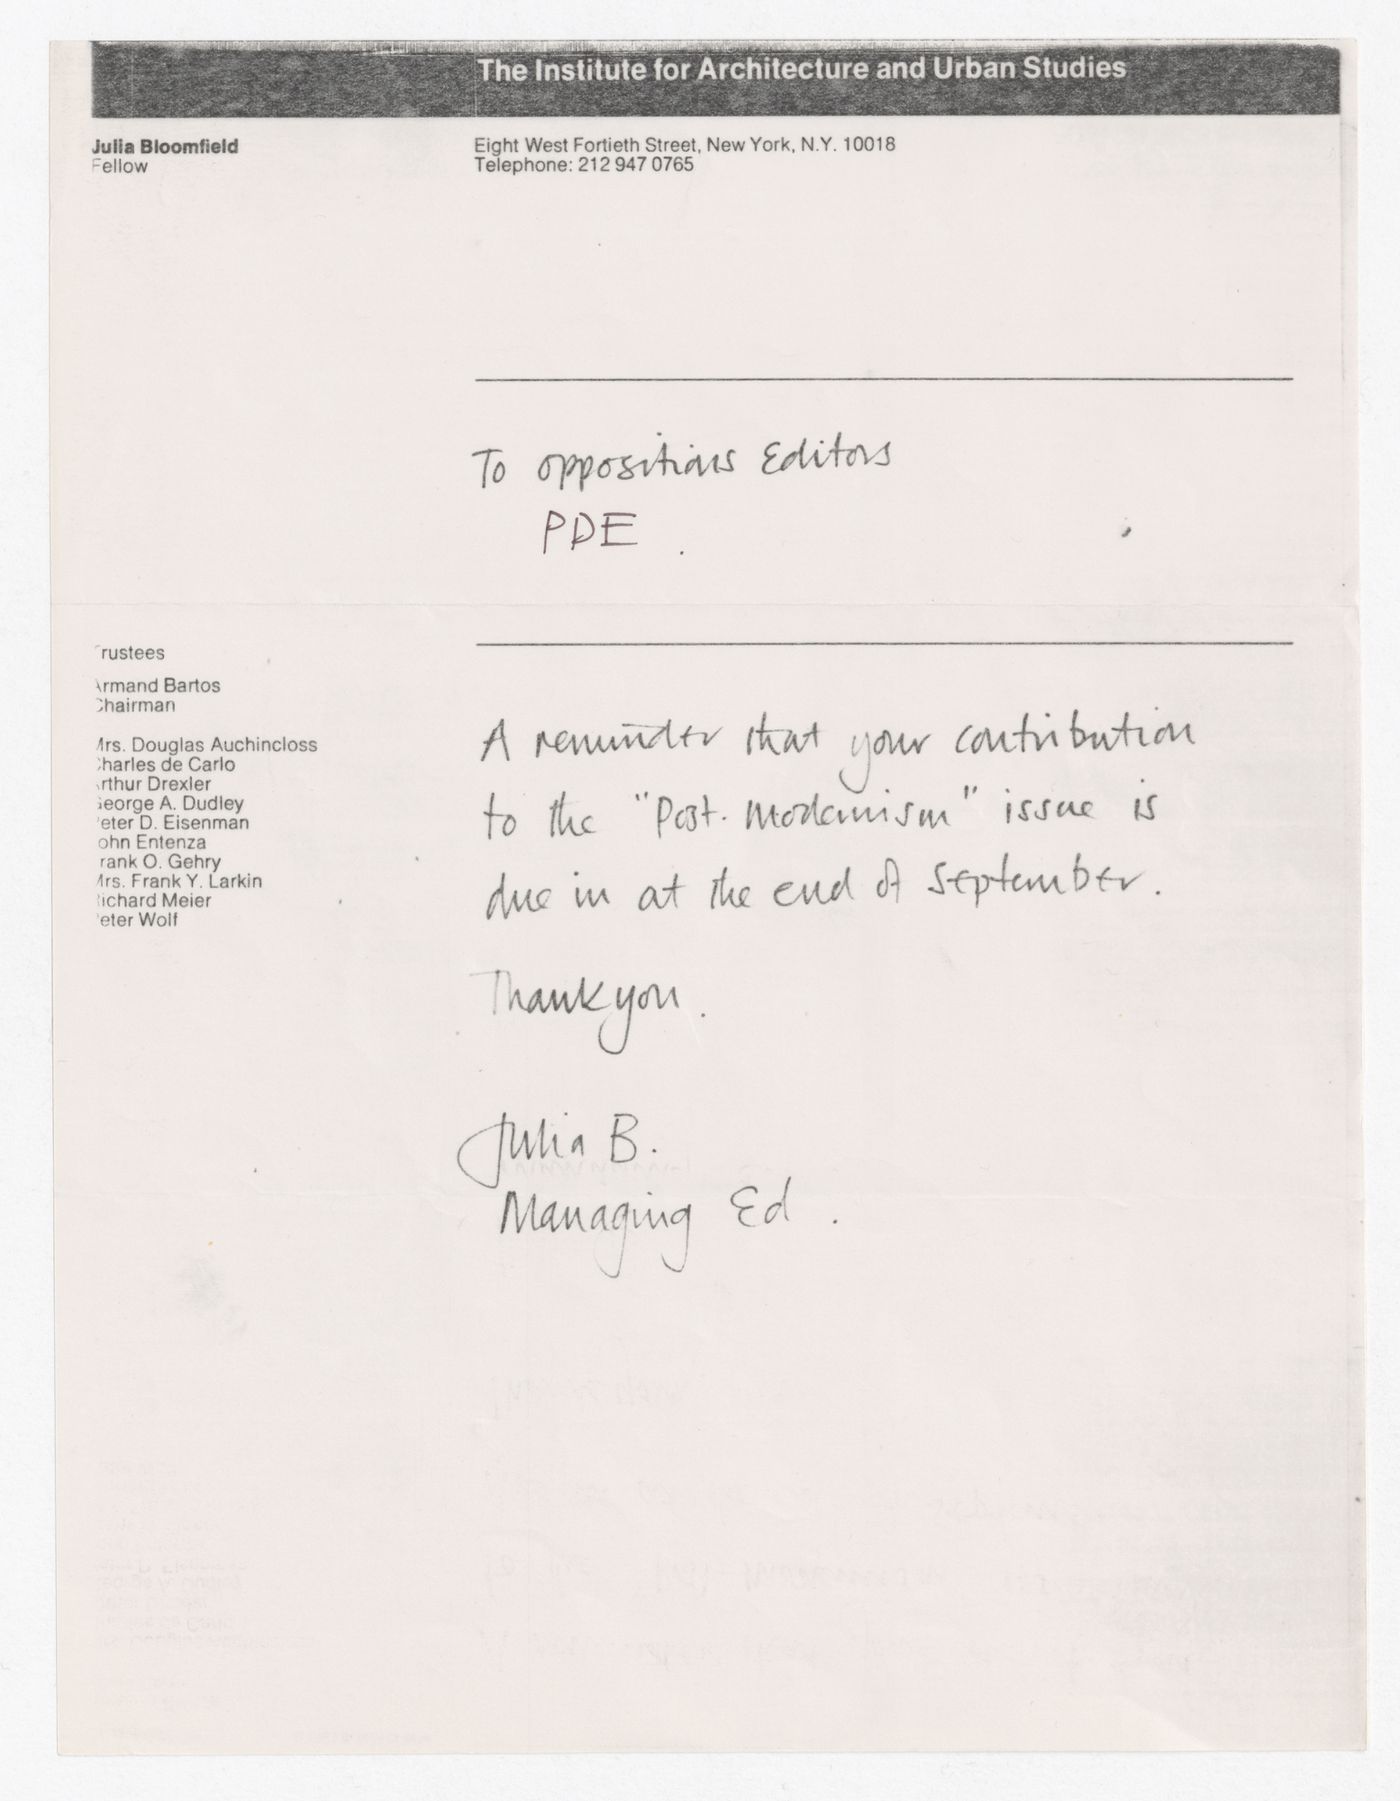 Memorandum from Julia Bloomfield to Peter D. Eisenman and Oppositions Journal editors about deadline for post-modernism issue